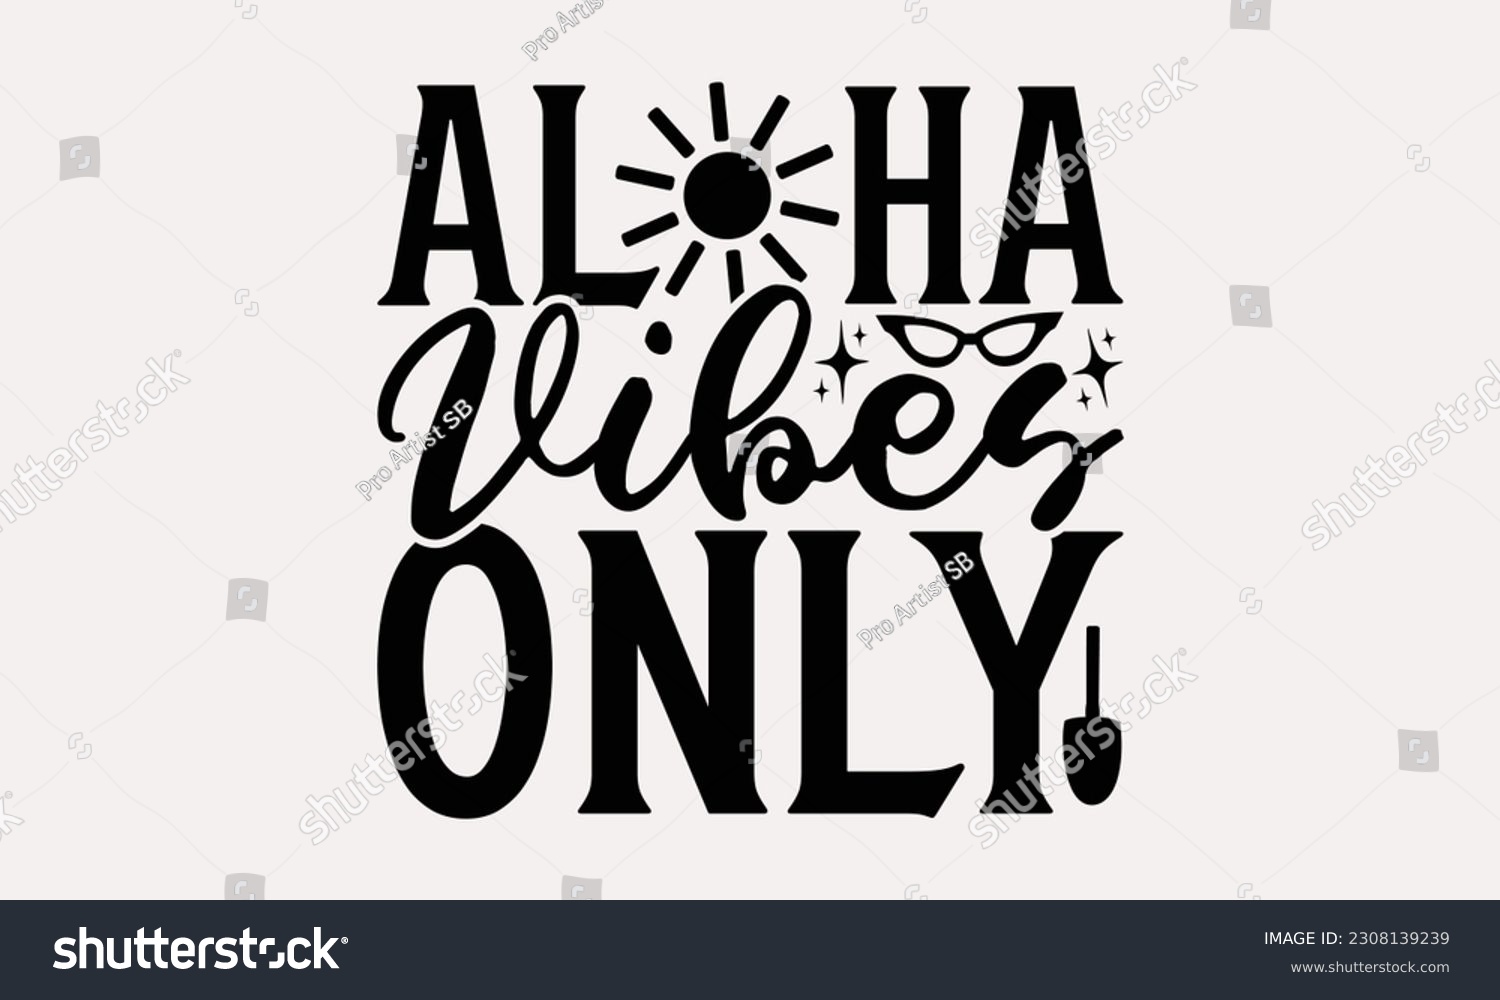 SVG of Aloha vibes only - Summer T-shirt Design, Beach Quotes, Summer Quotes SVG, Typography Poster Design Vector File, Hand Drawn Vintage Hand Lettering. svg